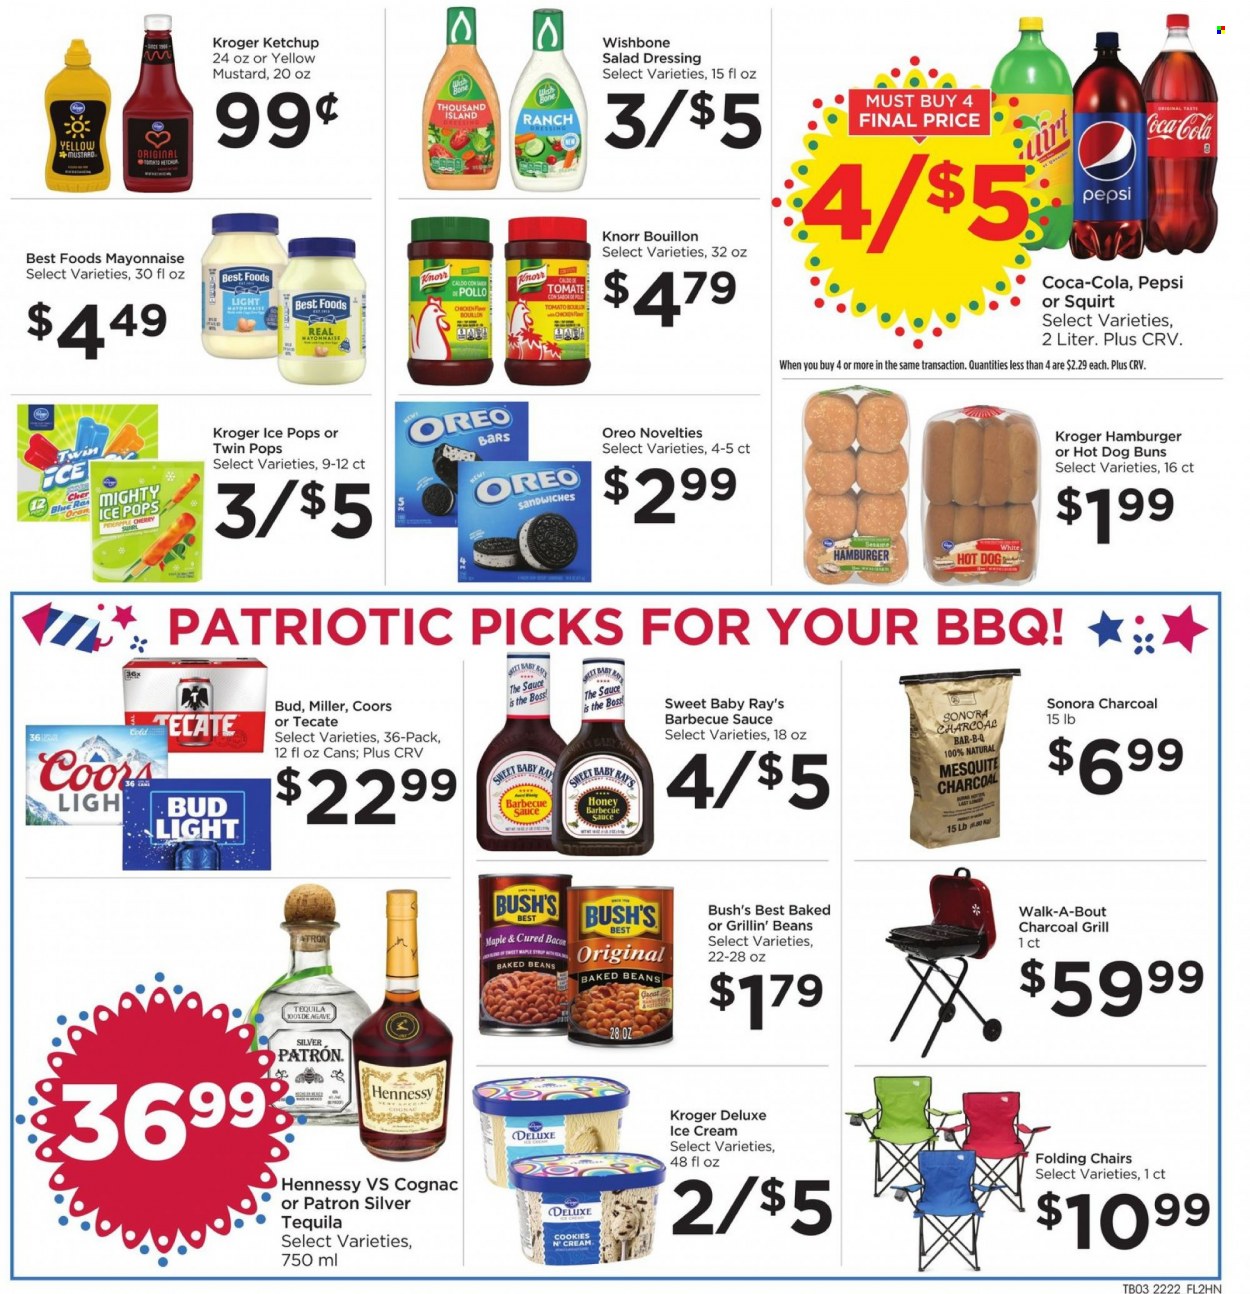 Foods Co ad  - 06.29.2022 - 07.05.2022.